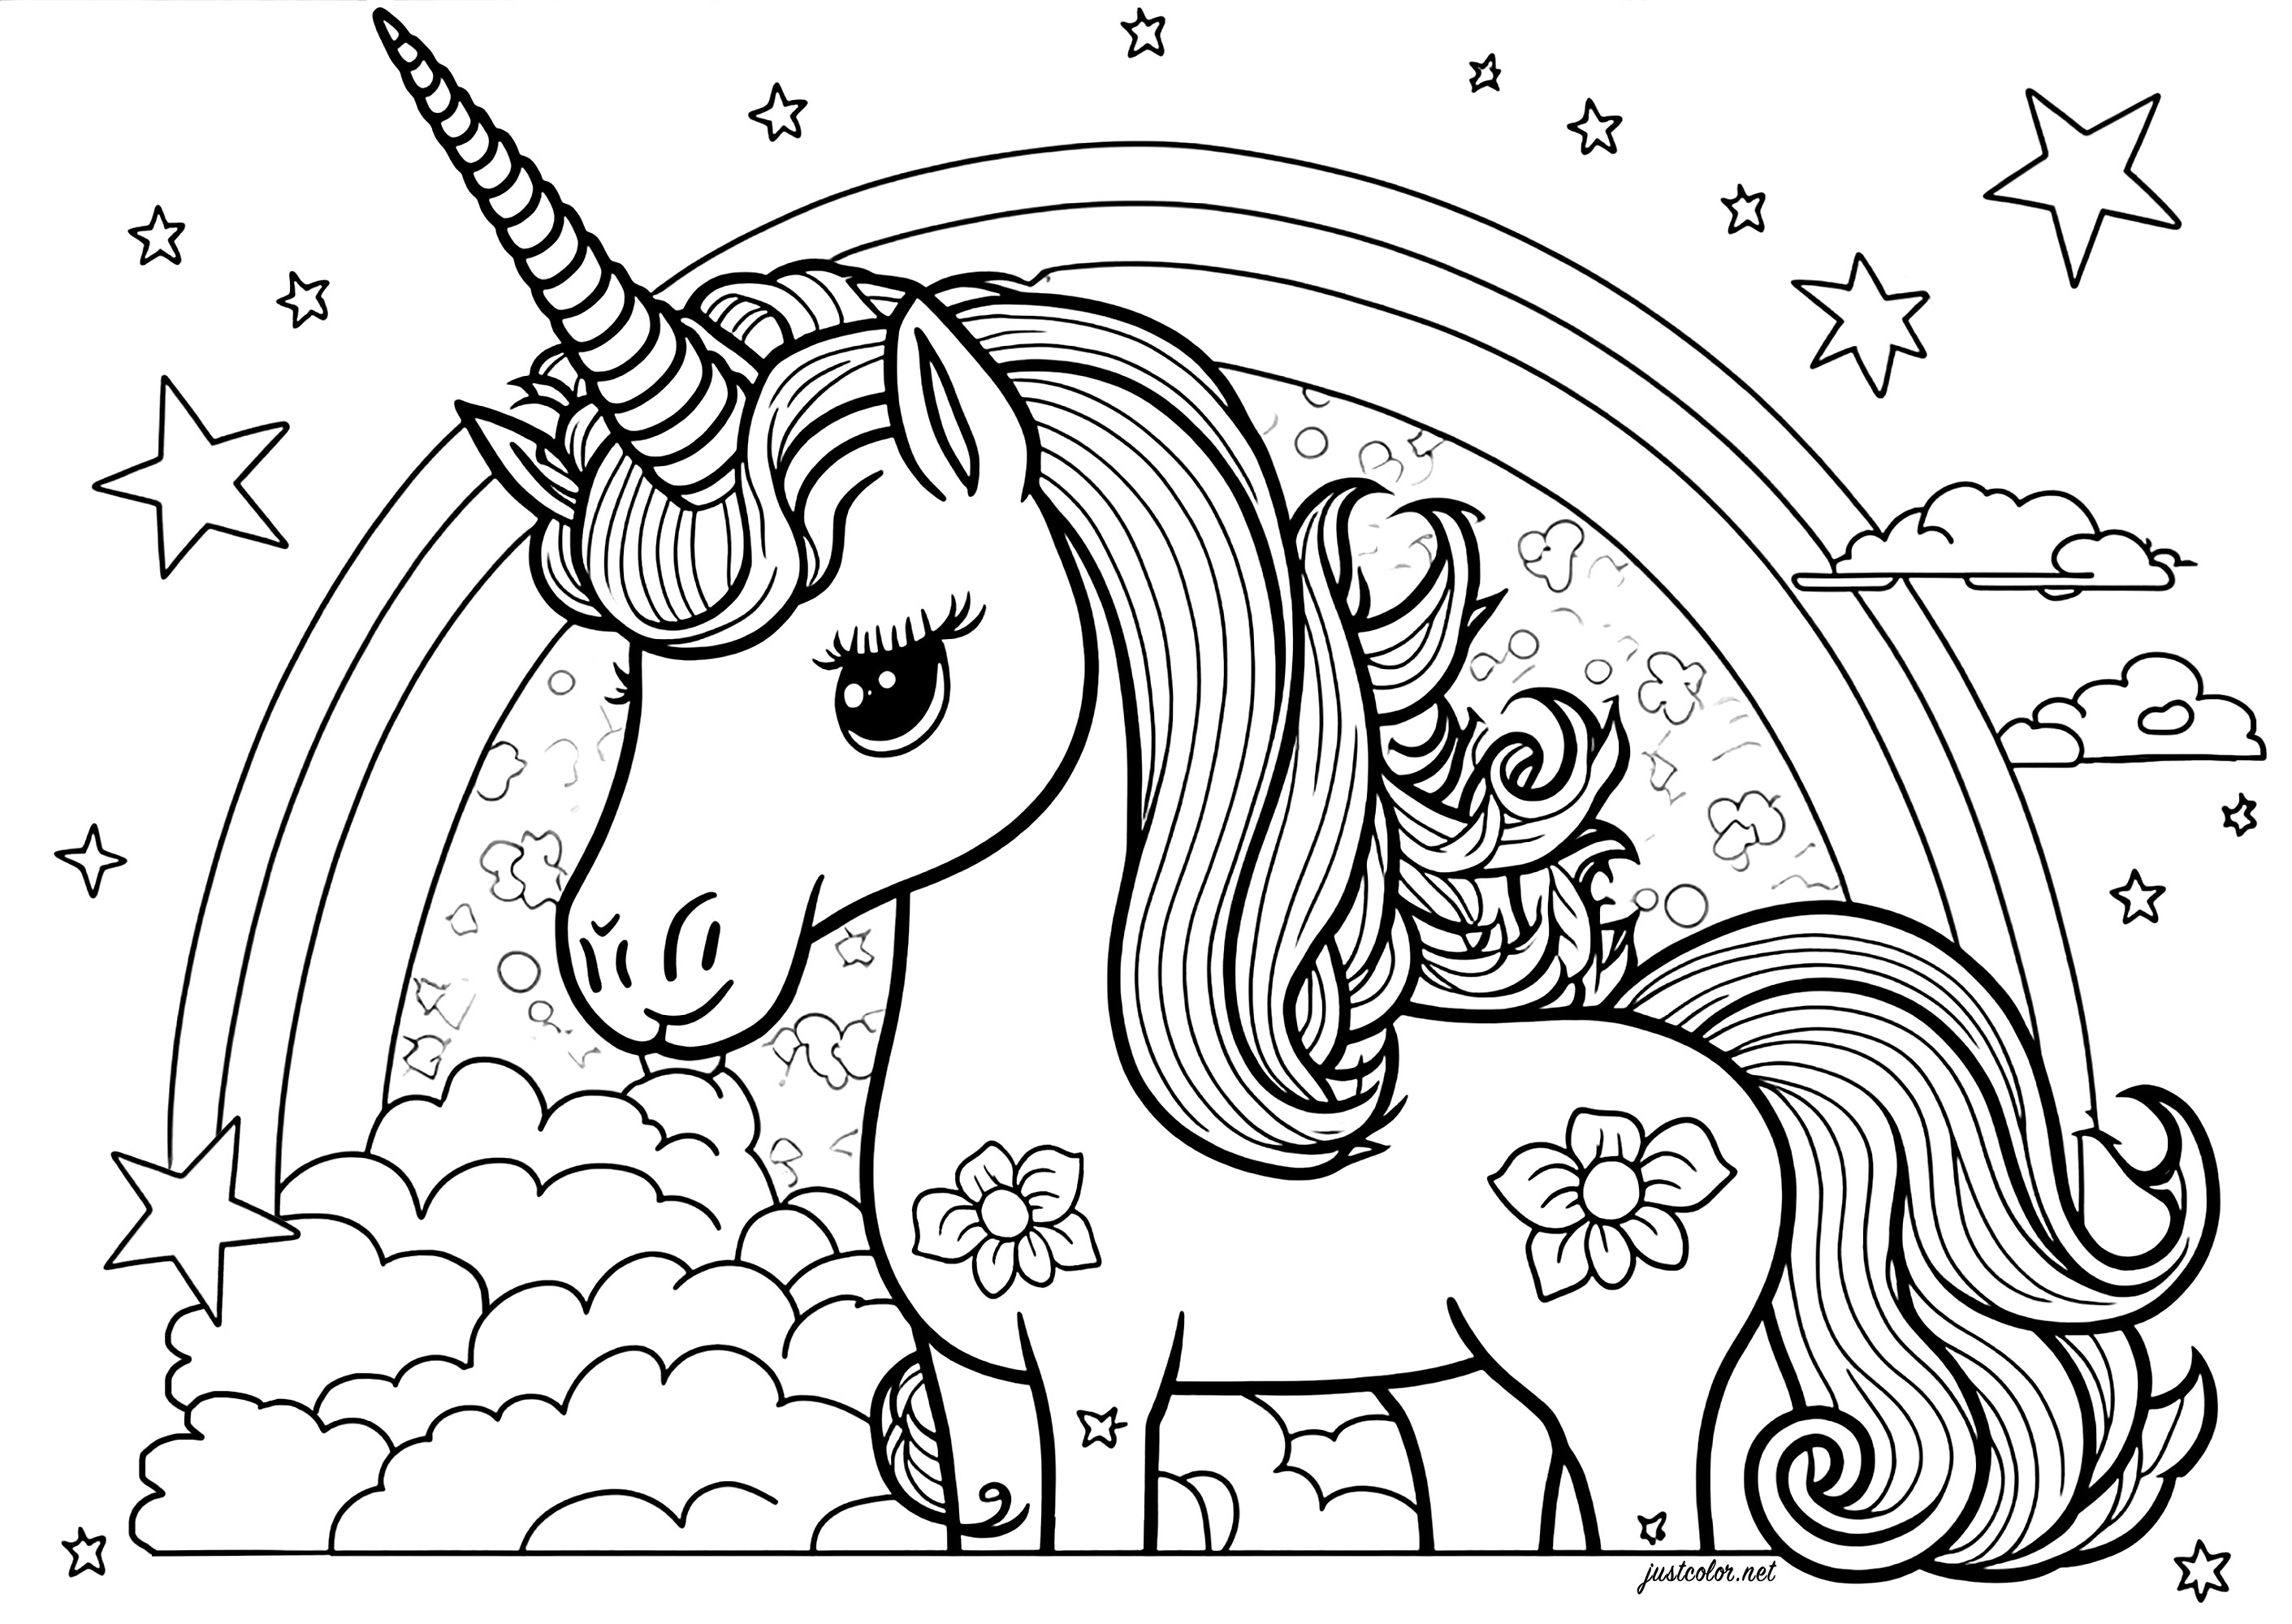 Coloring of a beautiful unicorn in front of a rainbow